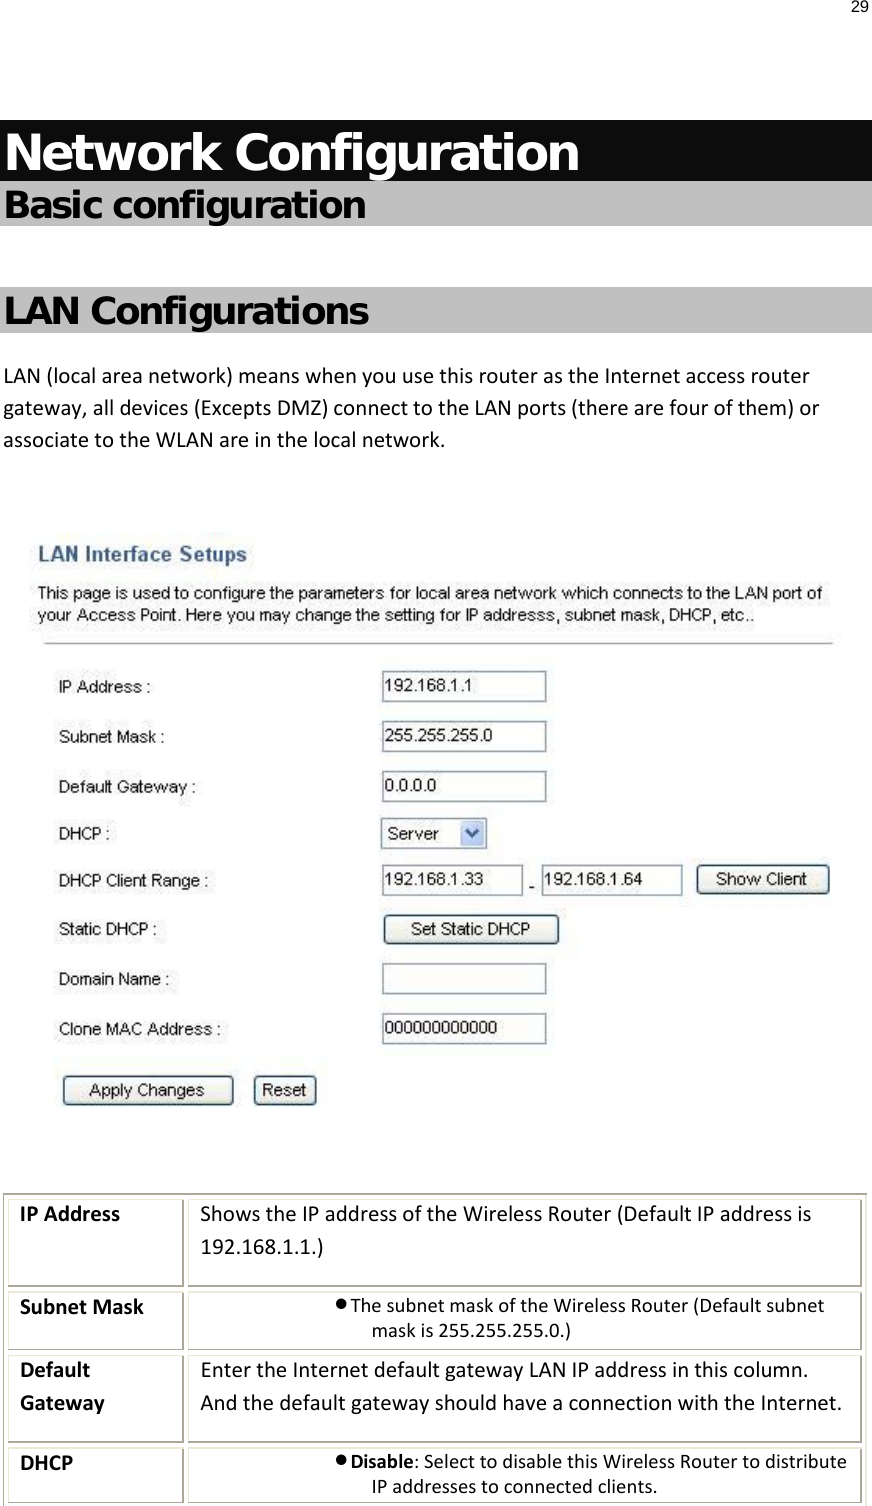 29   Network Configuration Basic configuration   LAN Configurations LAN (local area network) means when you use this router as the Internet access router gateway, all devices (Excepts DMZ) connect to the LAN ports (there are four of them) or associate to the WLAN are in the local network.    IP Address Shows the IP address of the Wireless Router (Default IP address is 192.168.1.1.) Subnet Mask • The subnet mask of the Wireless Router (Default subnet mask is 255.255.255.0.) Default Gateway Enter the Internet default gateway LAN IP address in this column. And the default gateway should have a connection with the Internet. DHCP • Disable: Select to disable this Wireless Router to distribute IP addresses to connected clients. 